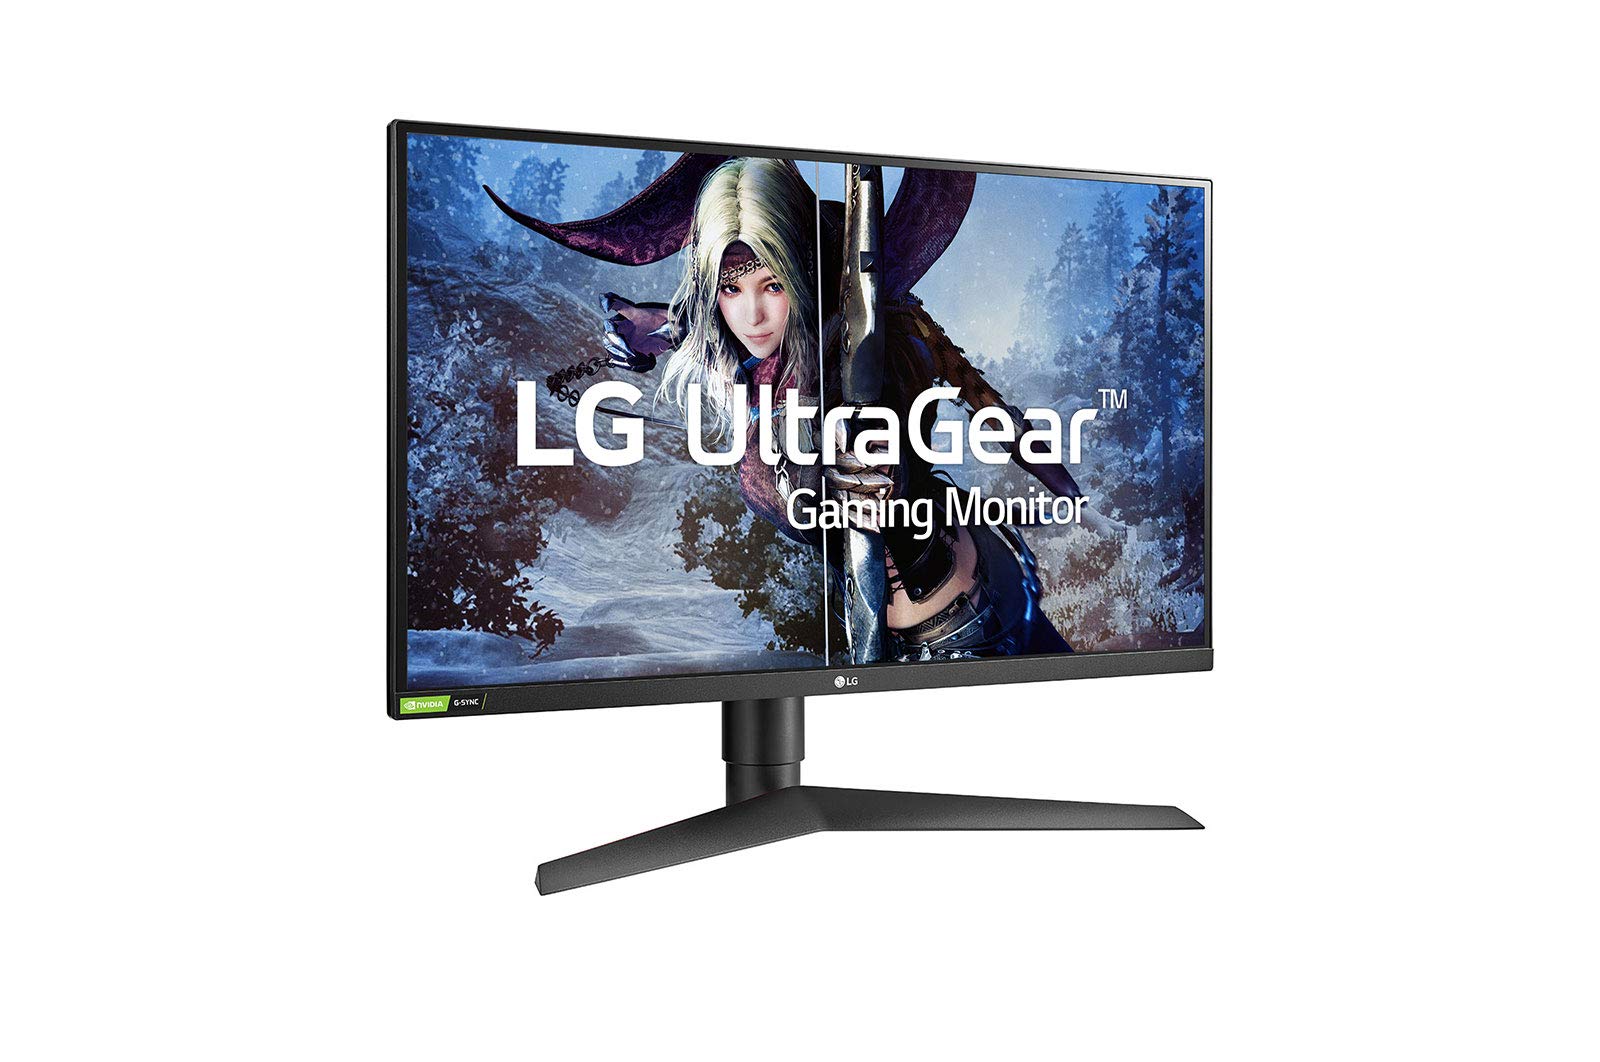 LG UltraGear QHD 27-Inch Gaming Monitor 27GL850-B, Nano IPS 1ms (GtG) with HDR 10 Compatibility and NVIDIA G-SYNC, 144Hz, Black